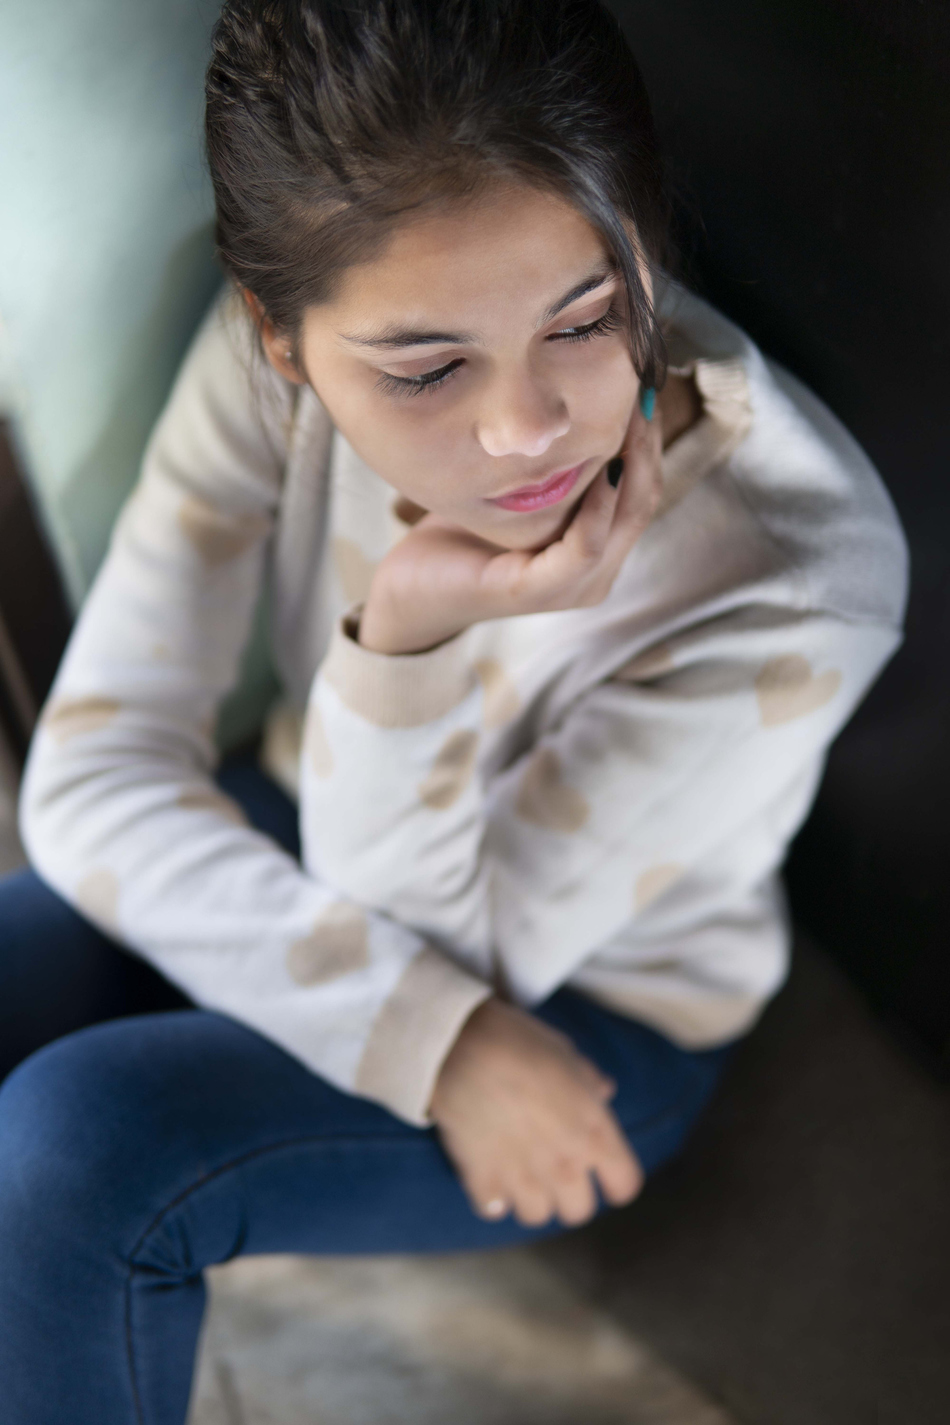 How to Identify and Discuss Self-Harm in Teens